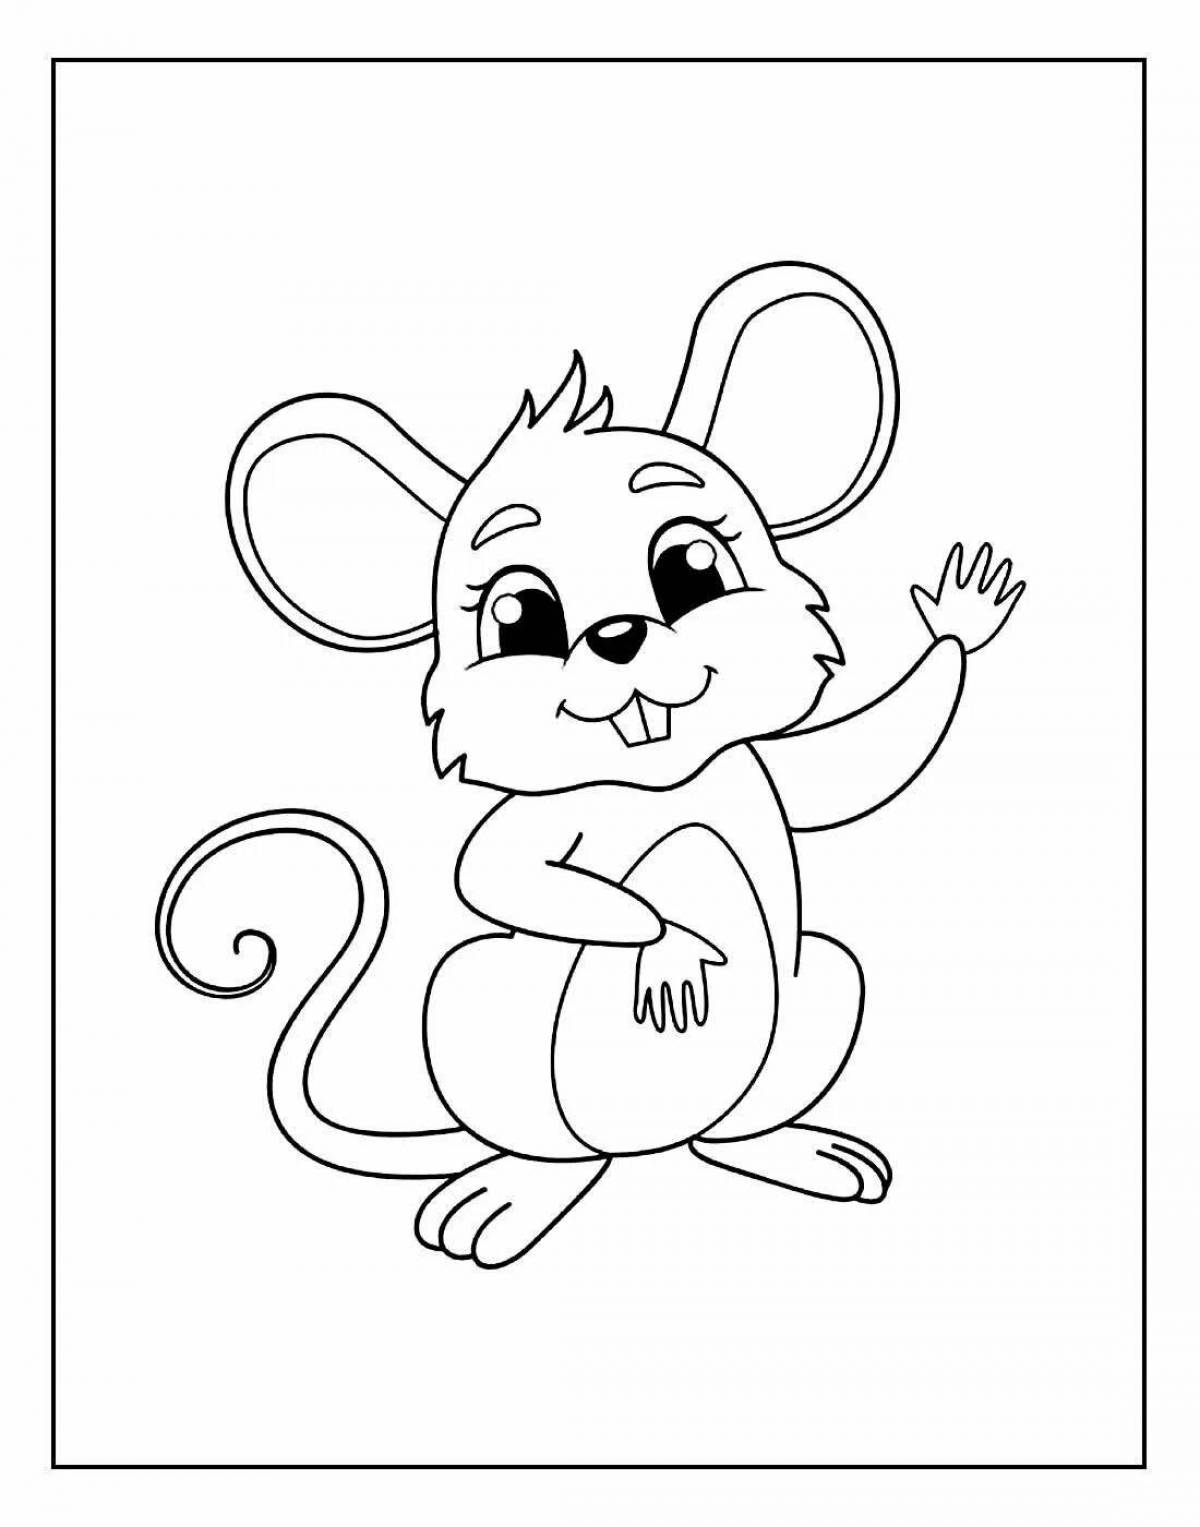 Cool mouse coloring book for kids 2-3 years old